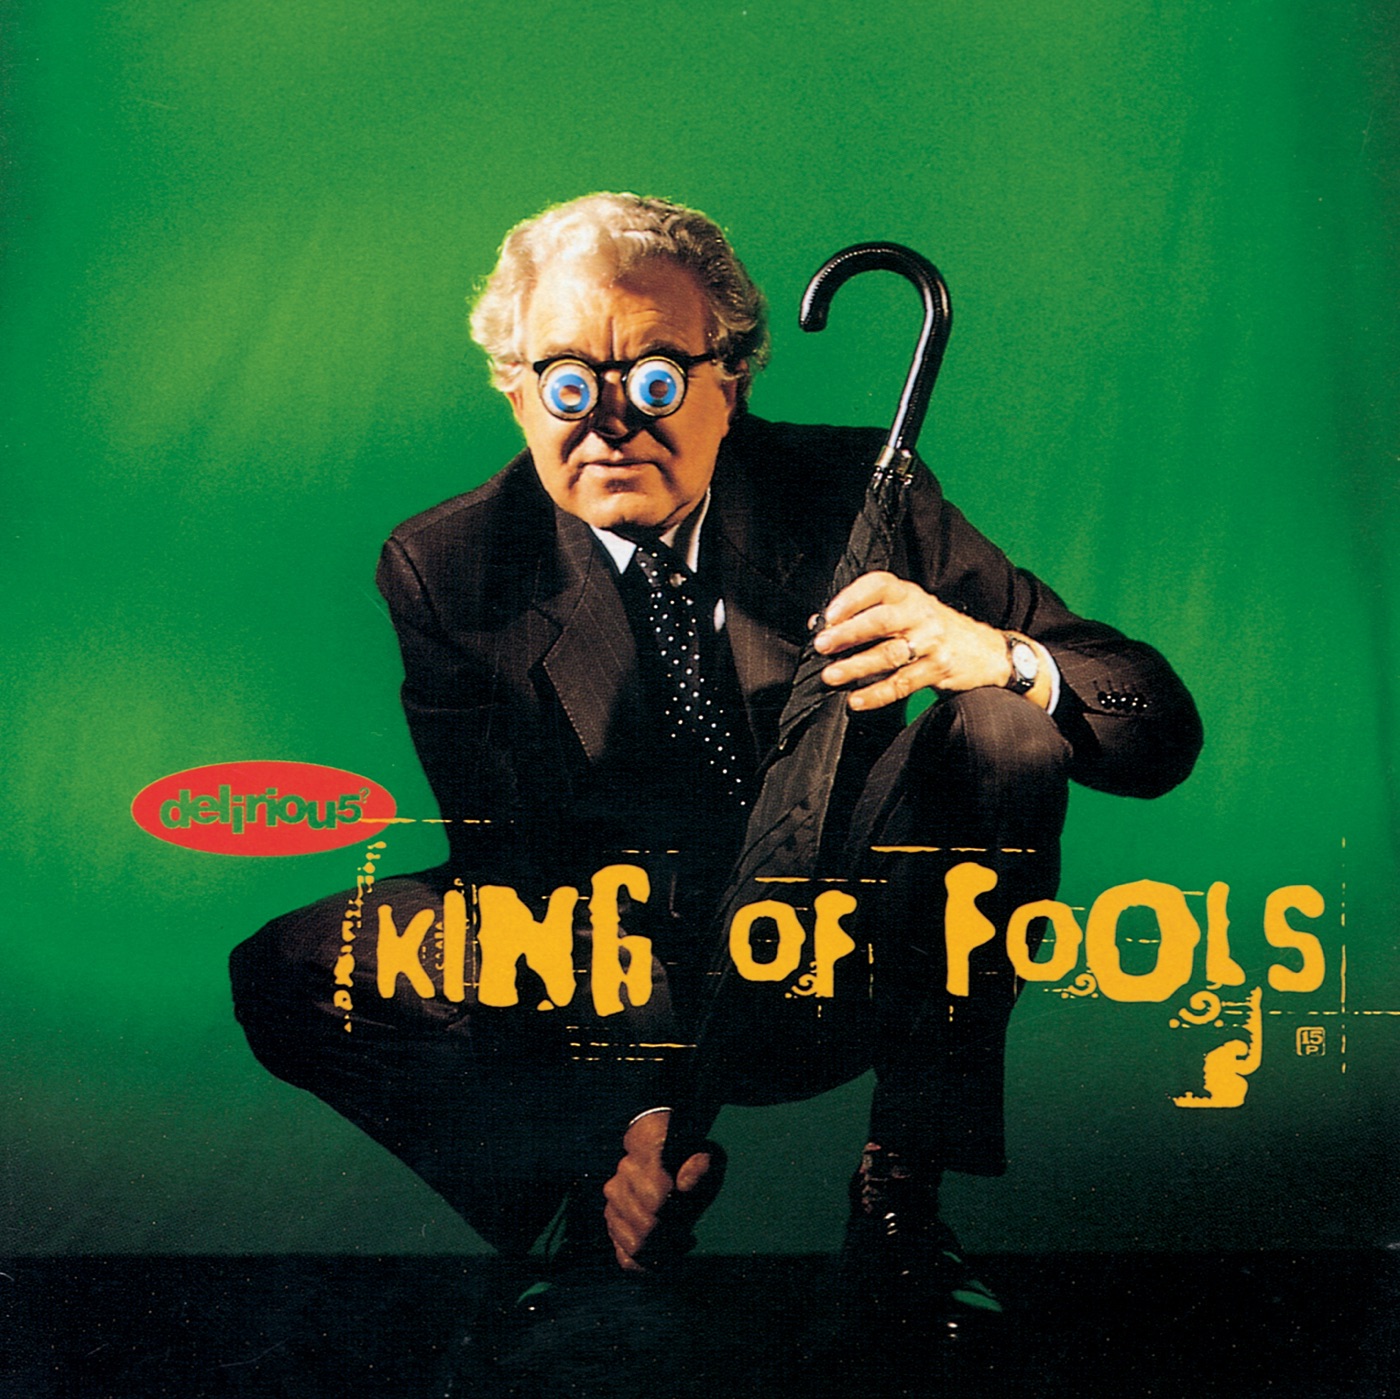 King of Fools by Delirious?